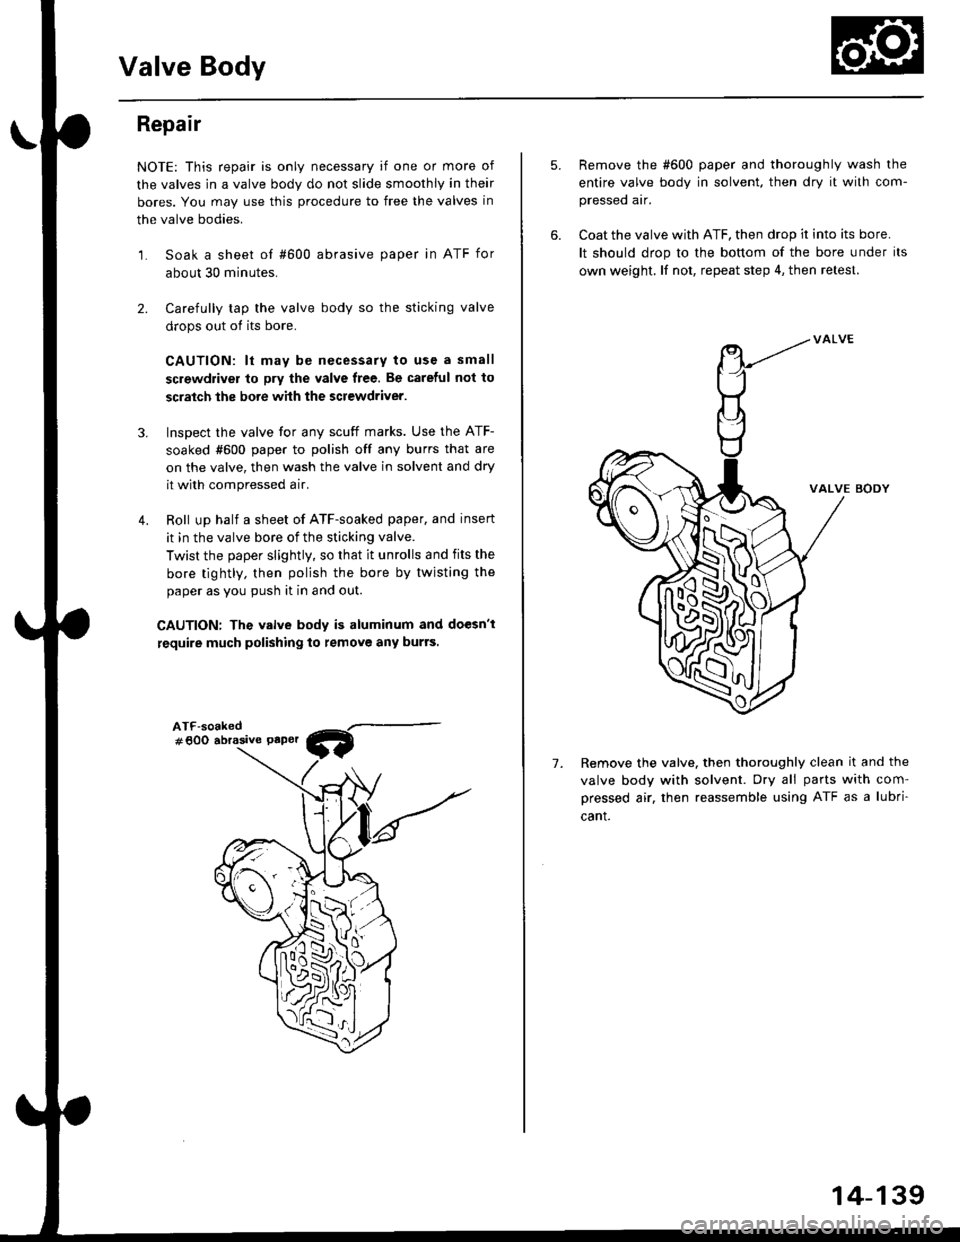 HONDA CIVIC 1996 6.G Workshop Manual Valve Body
2.
Repair
NOTE: This repair is only necessary if one or more of
the valves in a valve body do not slide smoothly in their
bores. You may use this procedure to free the valves in
the valve b